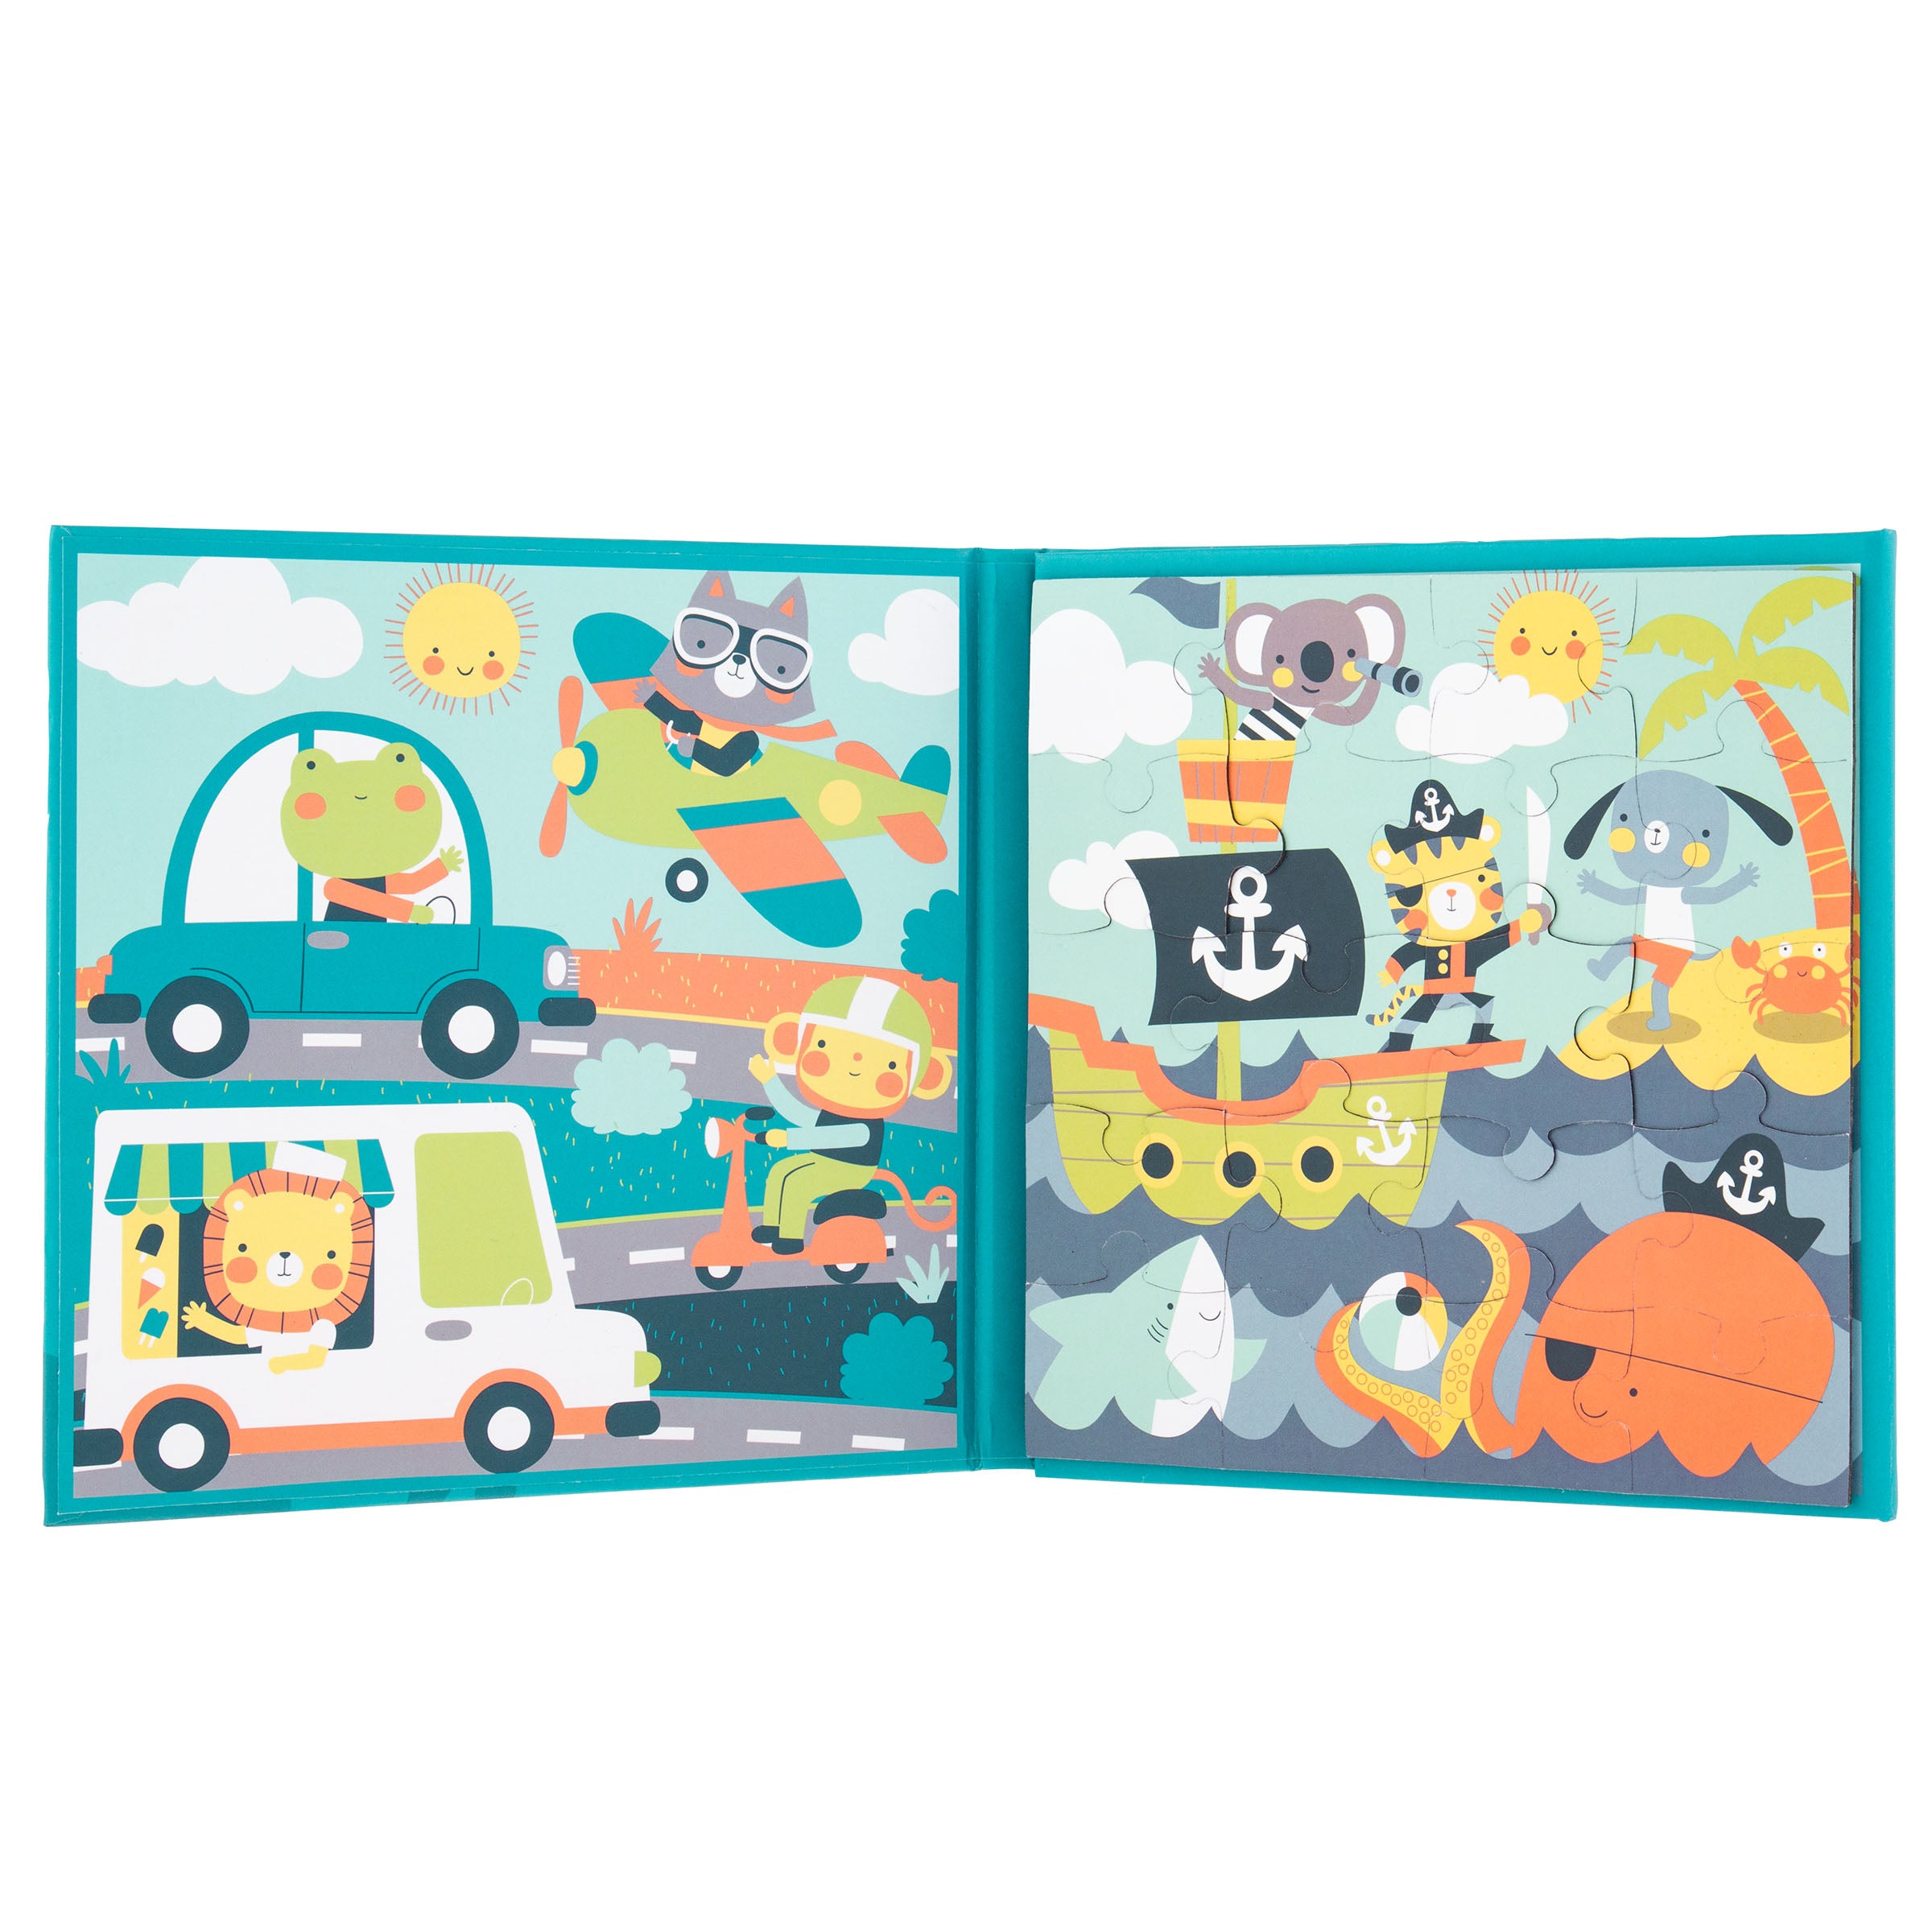 Stephen Joseph 4-In-1 Magnetic Puzzle Book – Blue